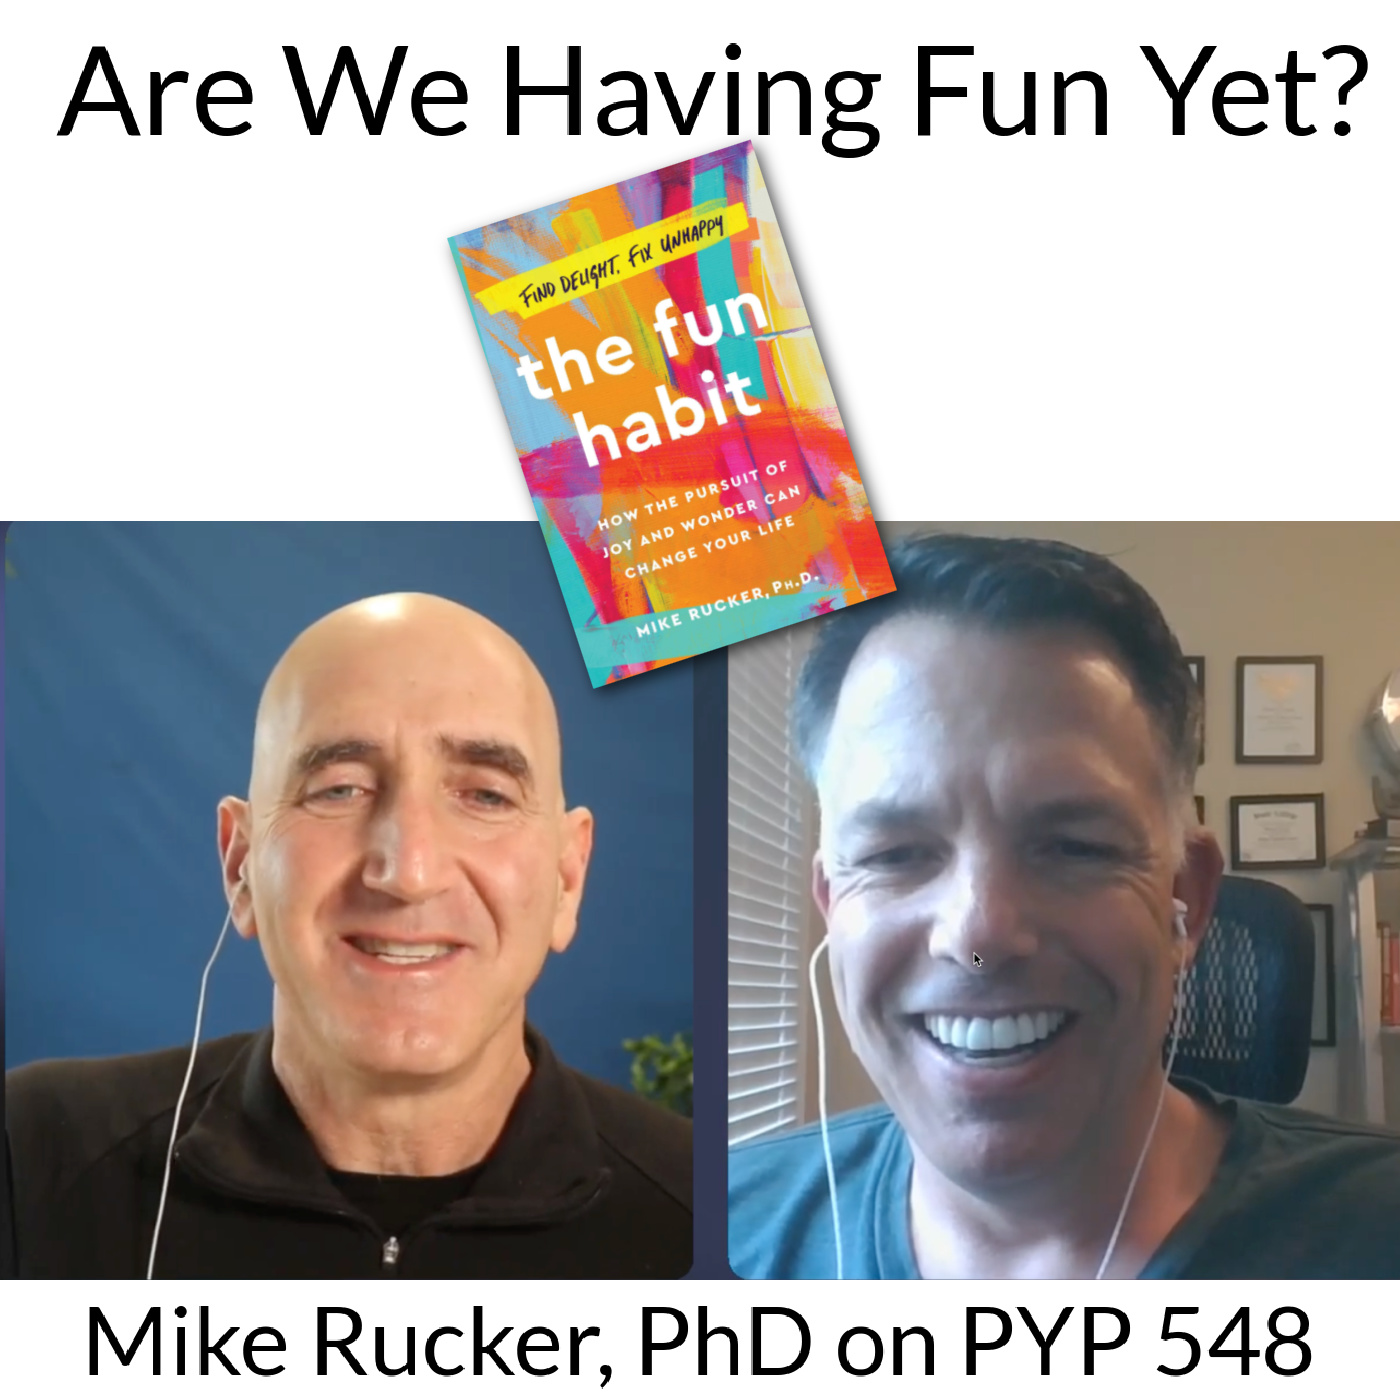 Are We Having Fun Yet?: Mike Rucker on PYP 548